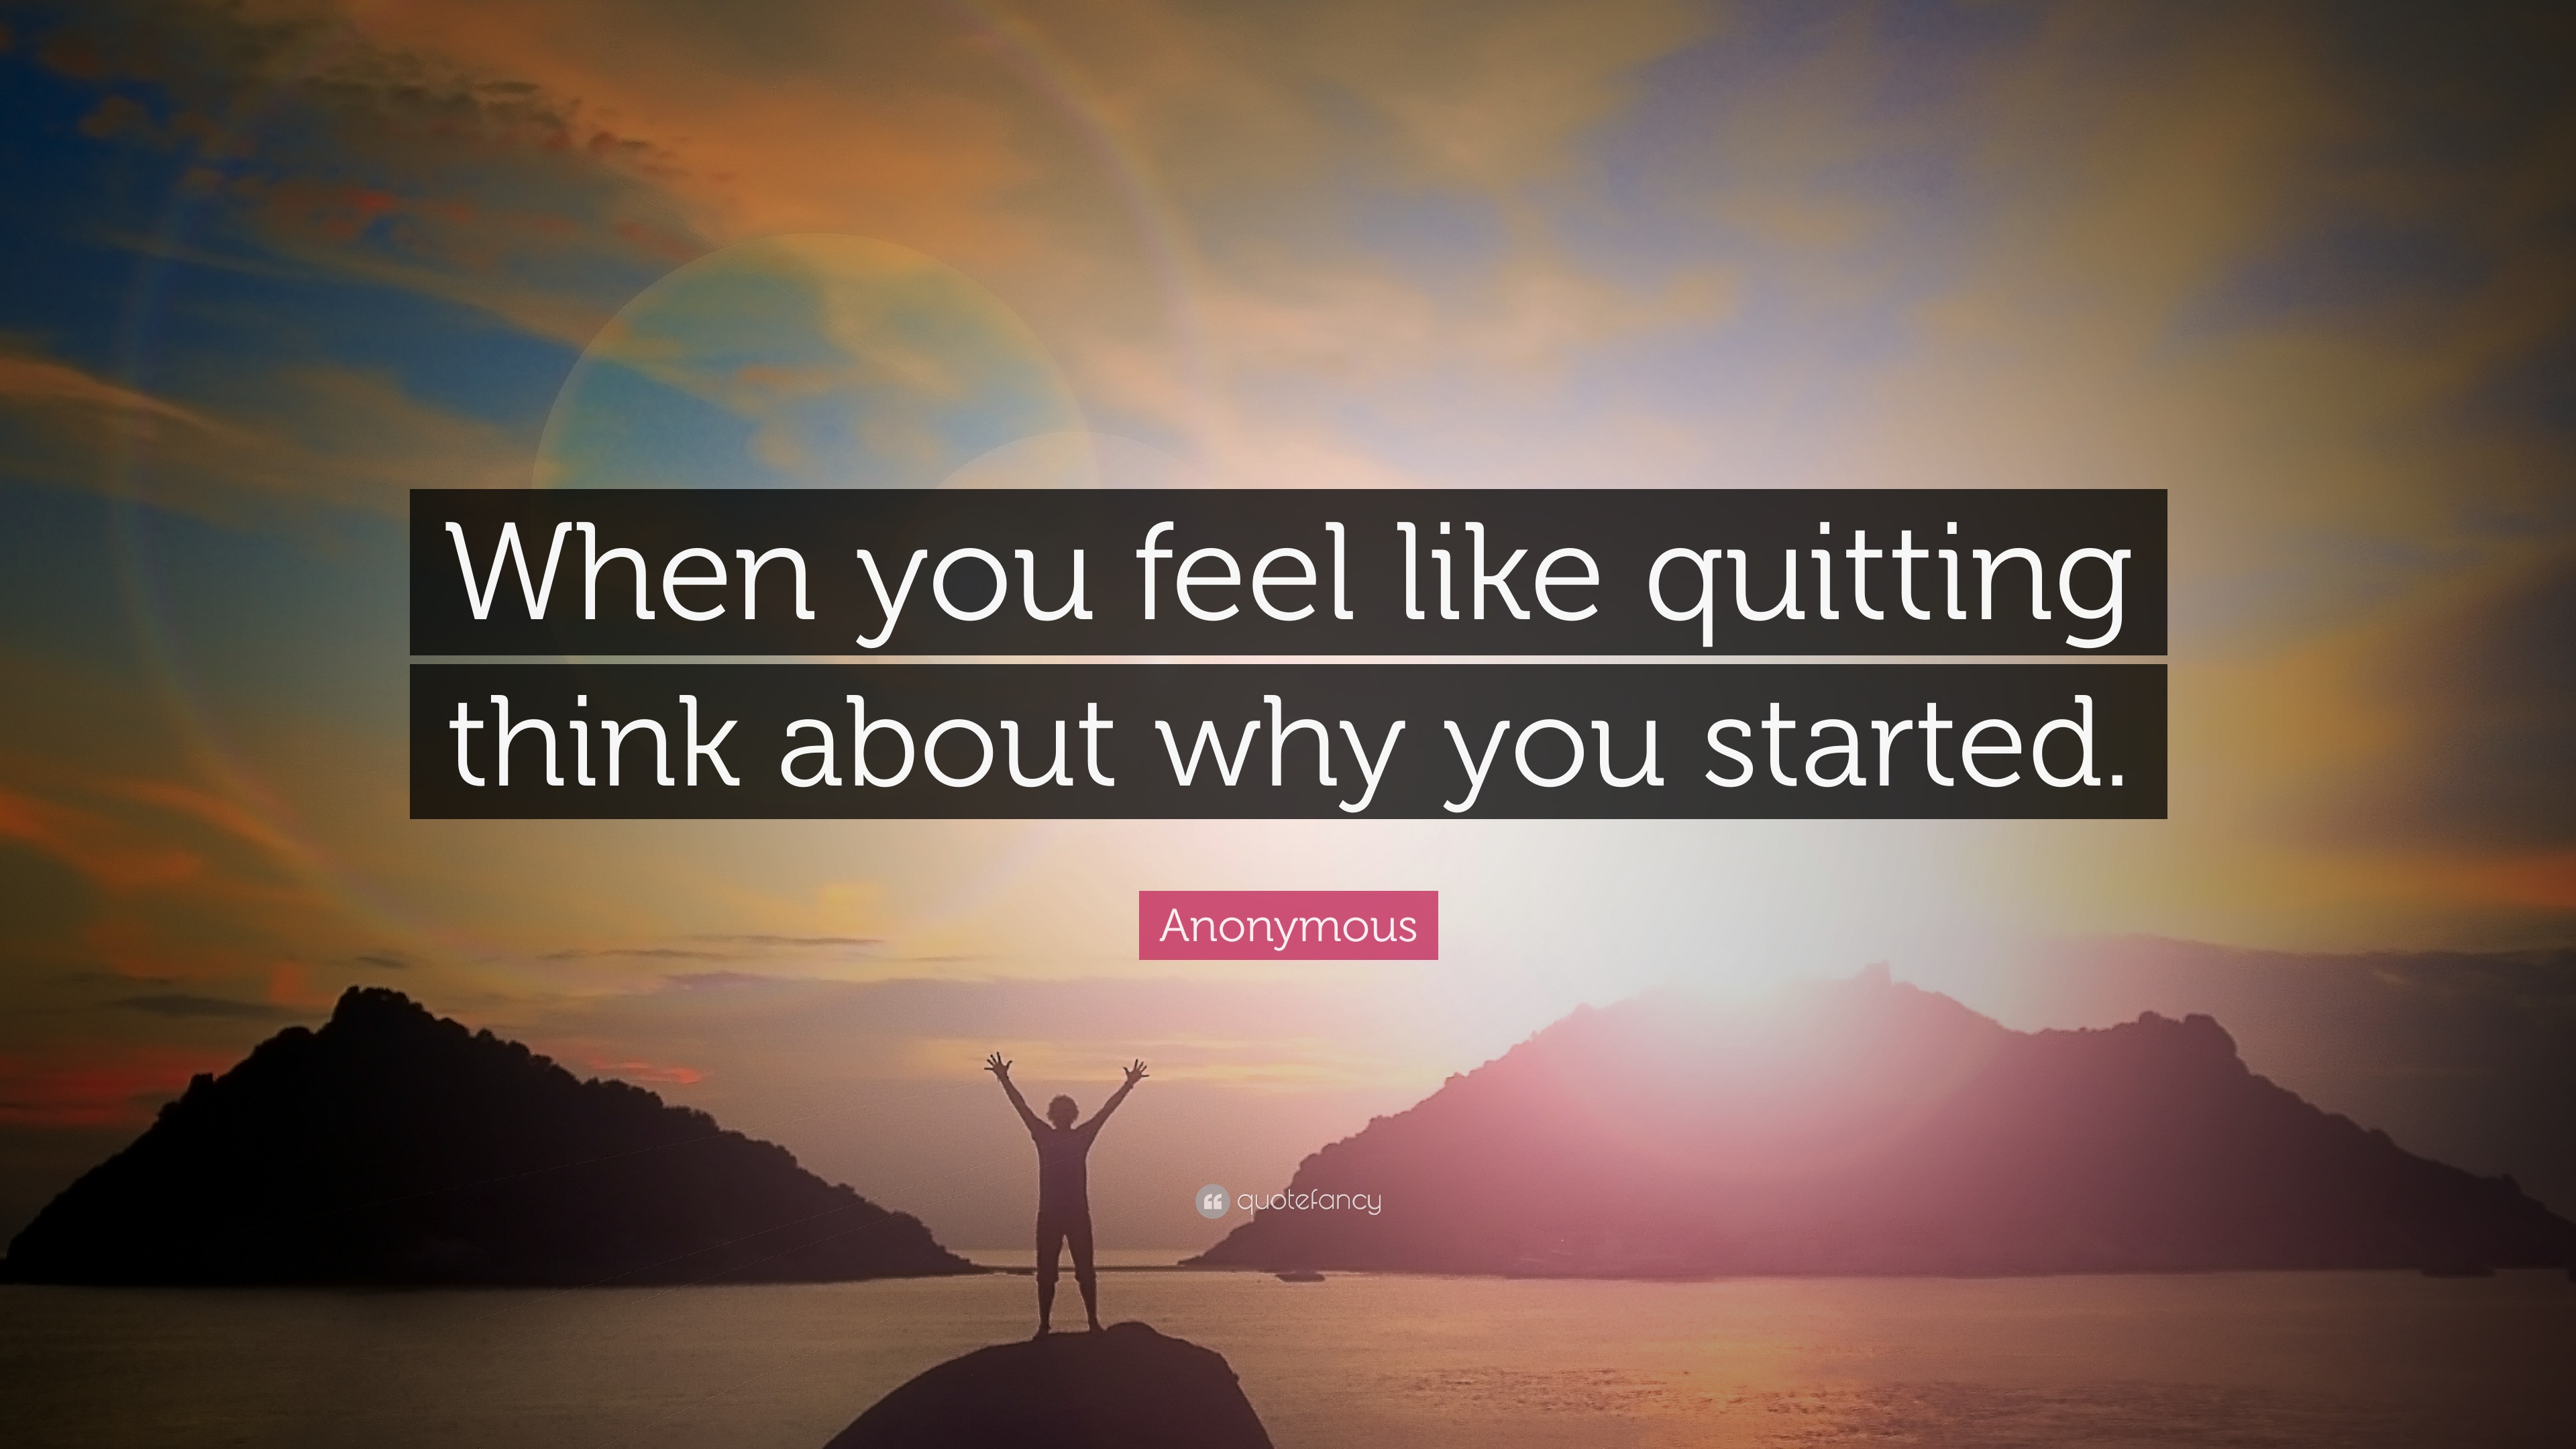 Anonymous Quote: “When you feel like quitting think about why you started.”